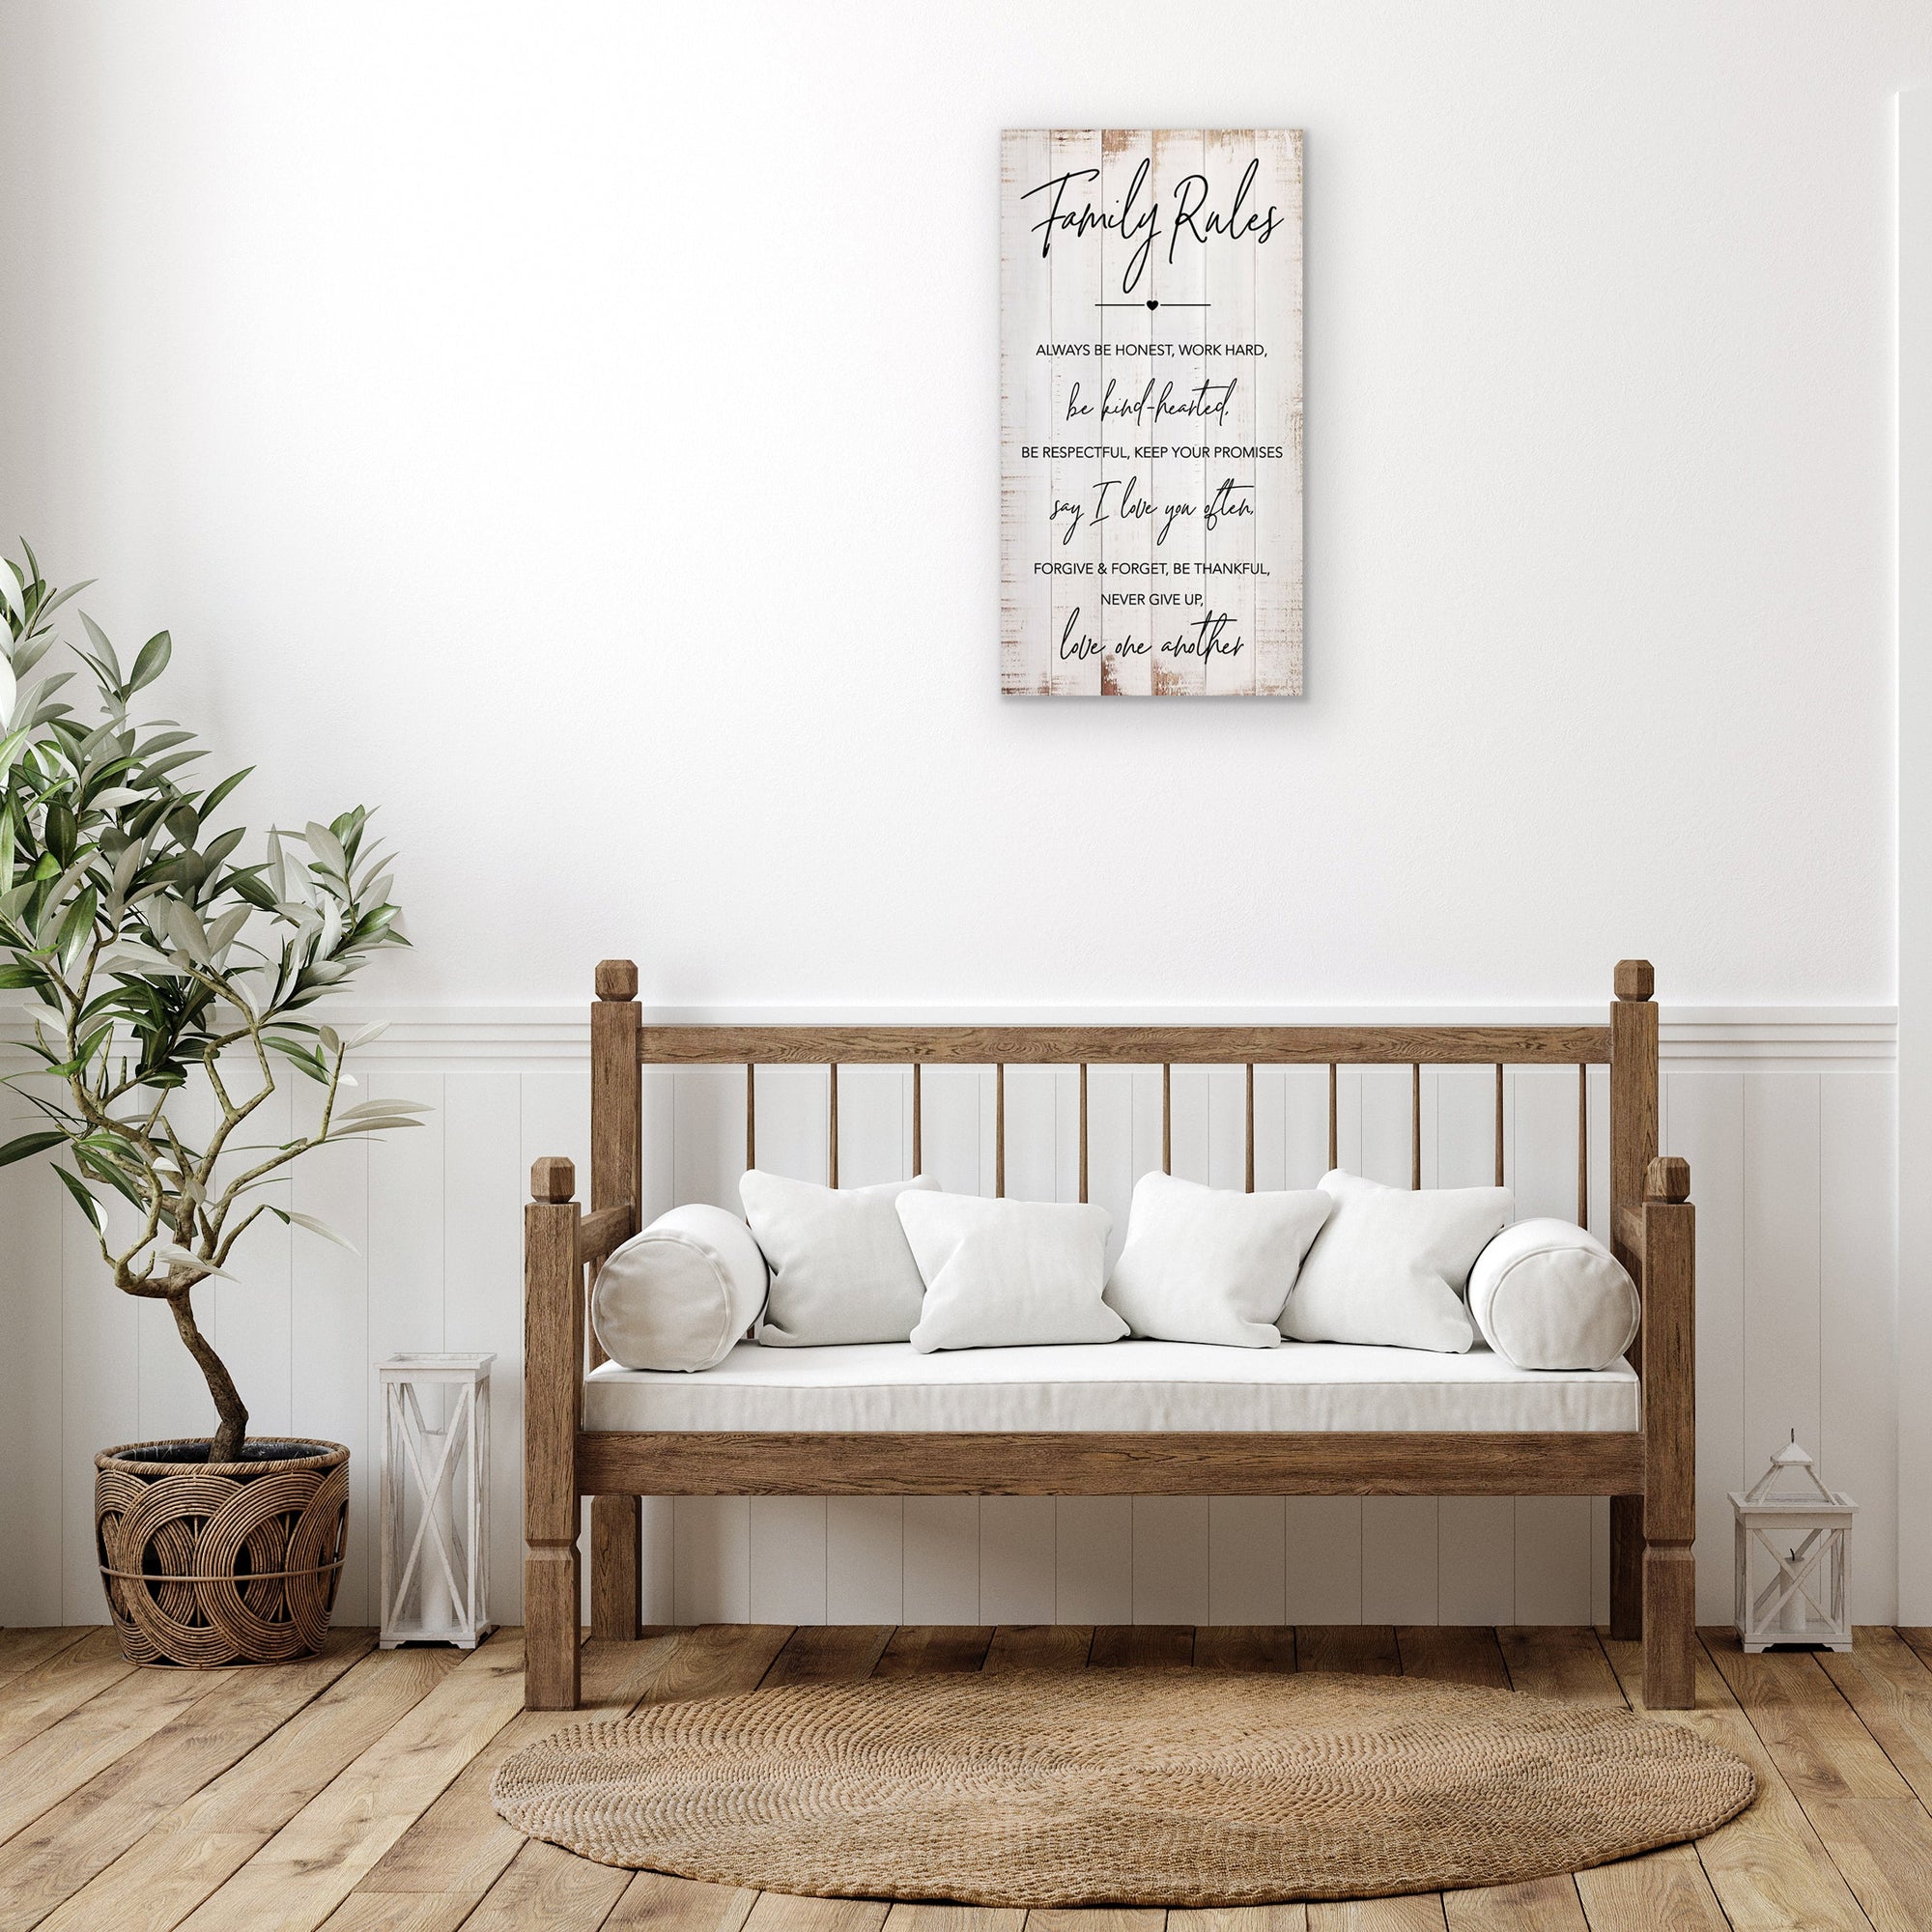 Lifesong Milestones Wooden Family Wall Plaque for Home Decorations: A Beautiful Wall Sign for Home Décor